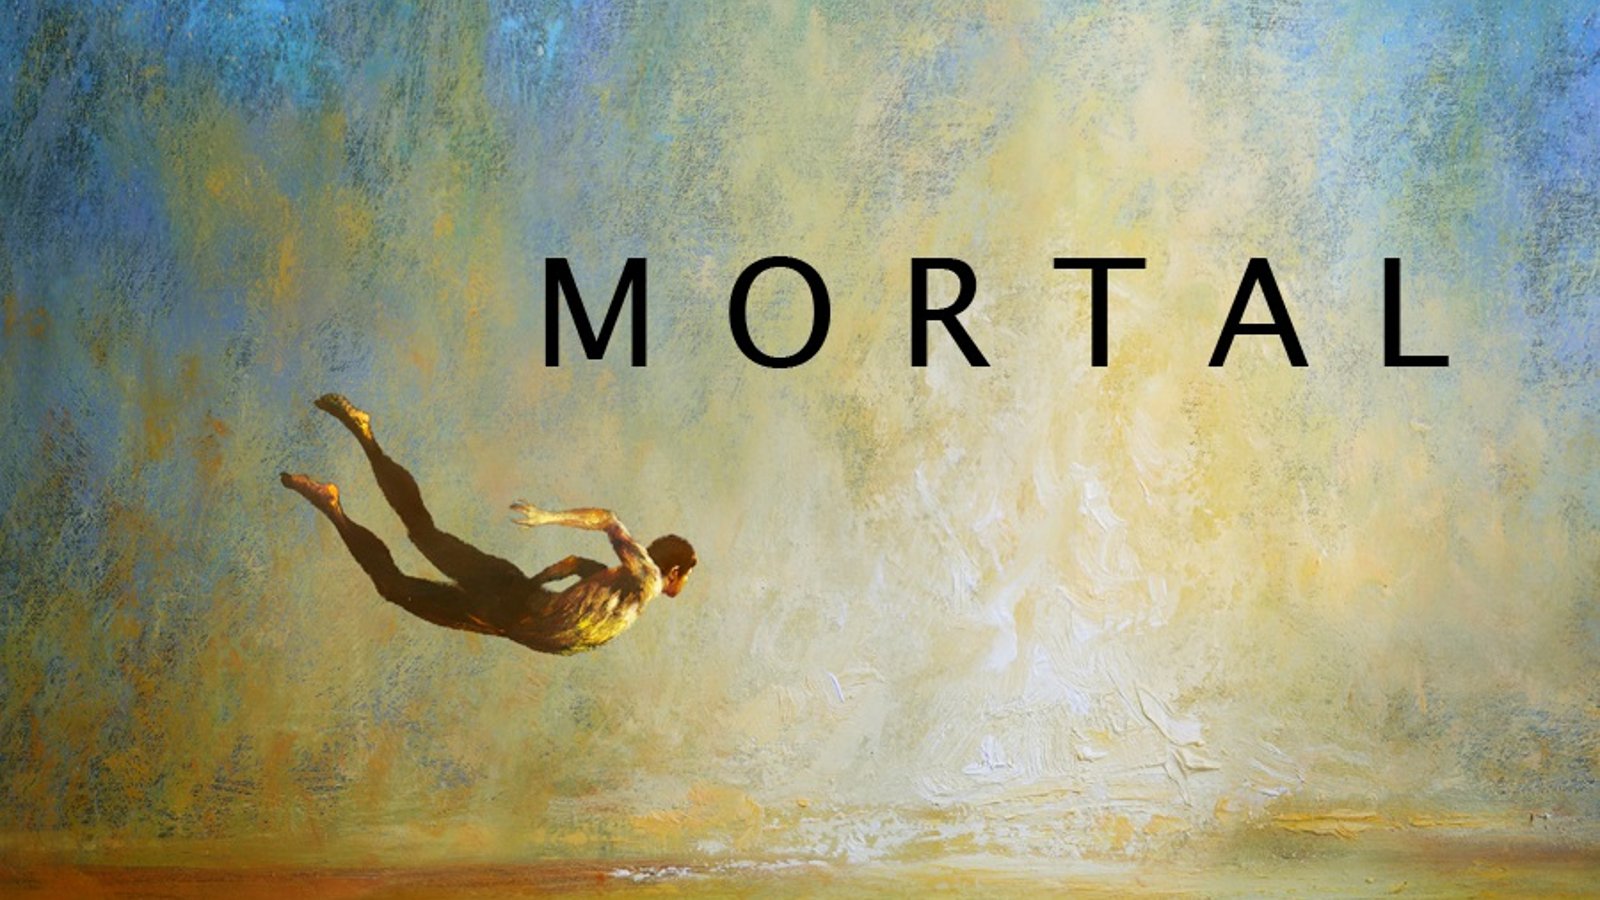 Mortal - Changing Views on Life and Death